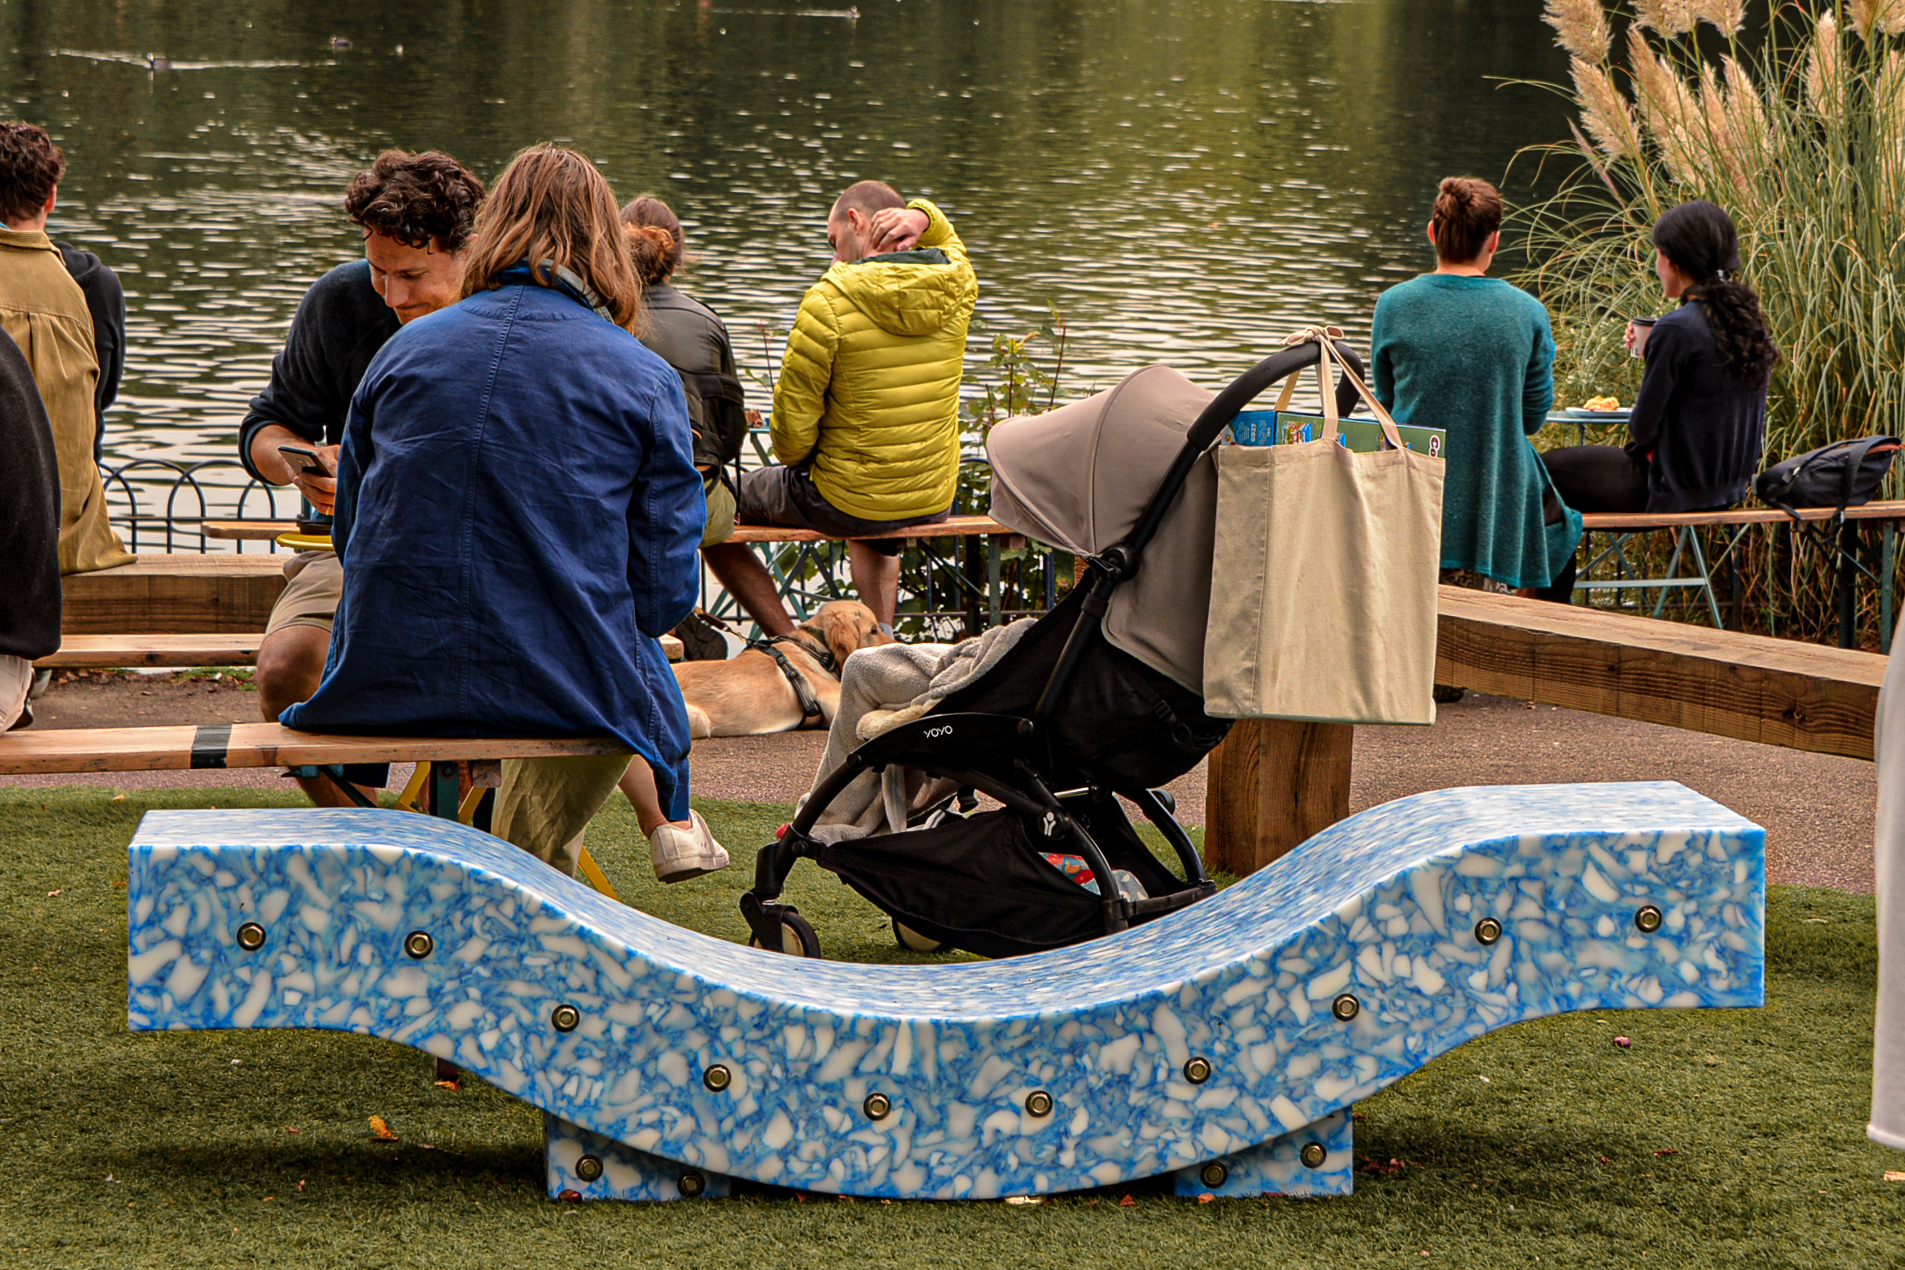 LFA Bench by 10.f Collective in Victoria Park Pavilion 